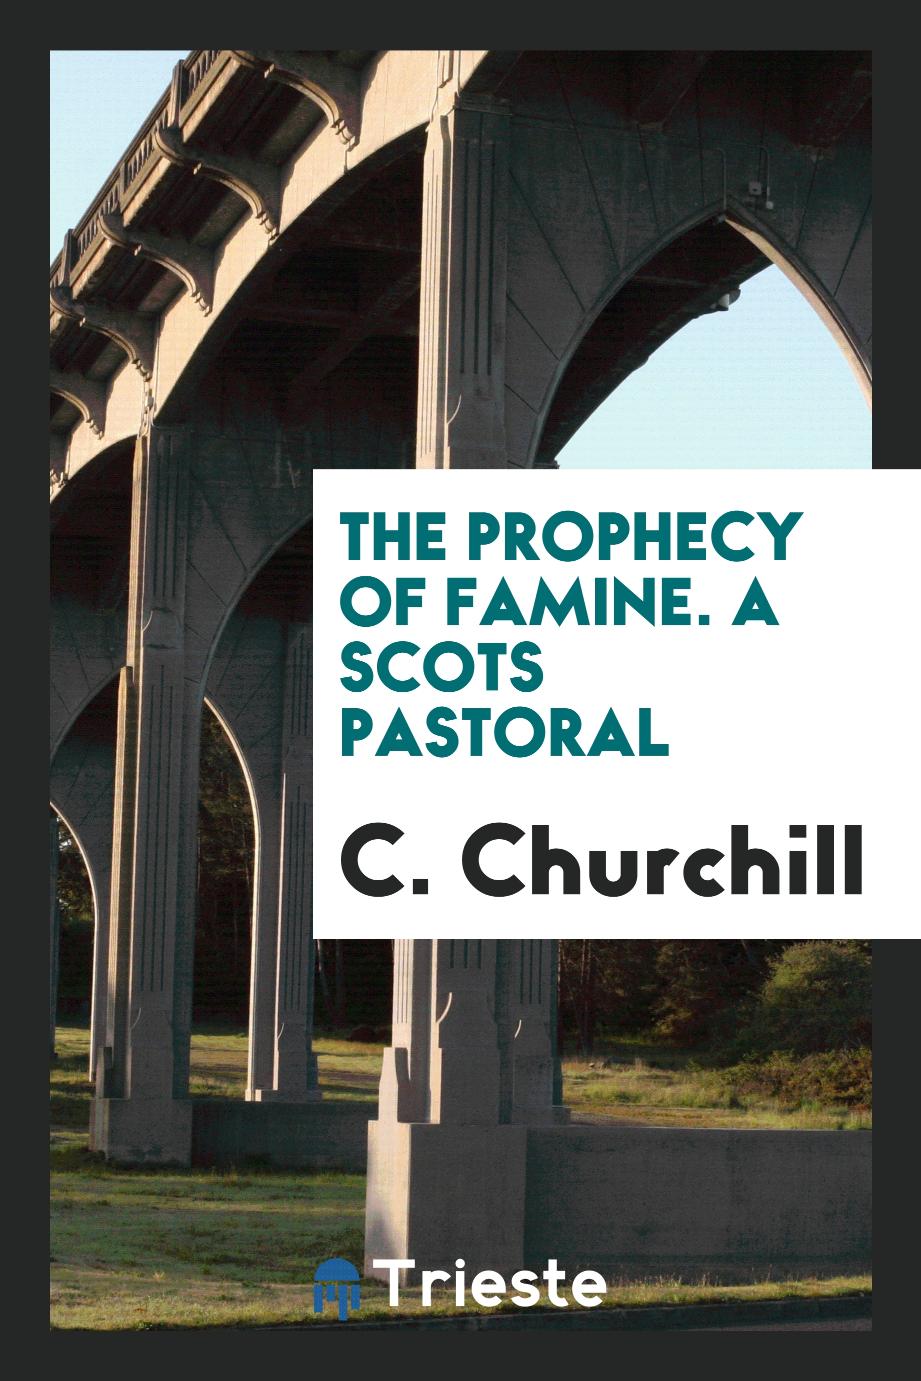 The prophecy of famine. A Scots pastoral